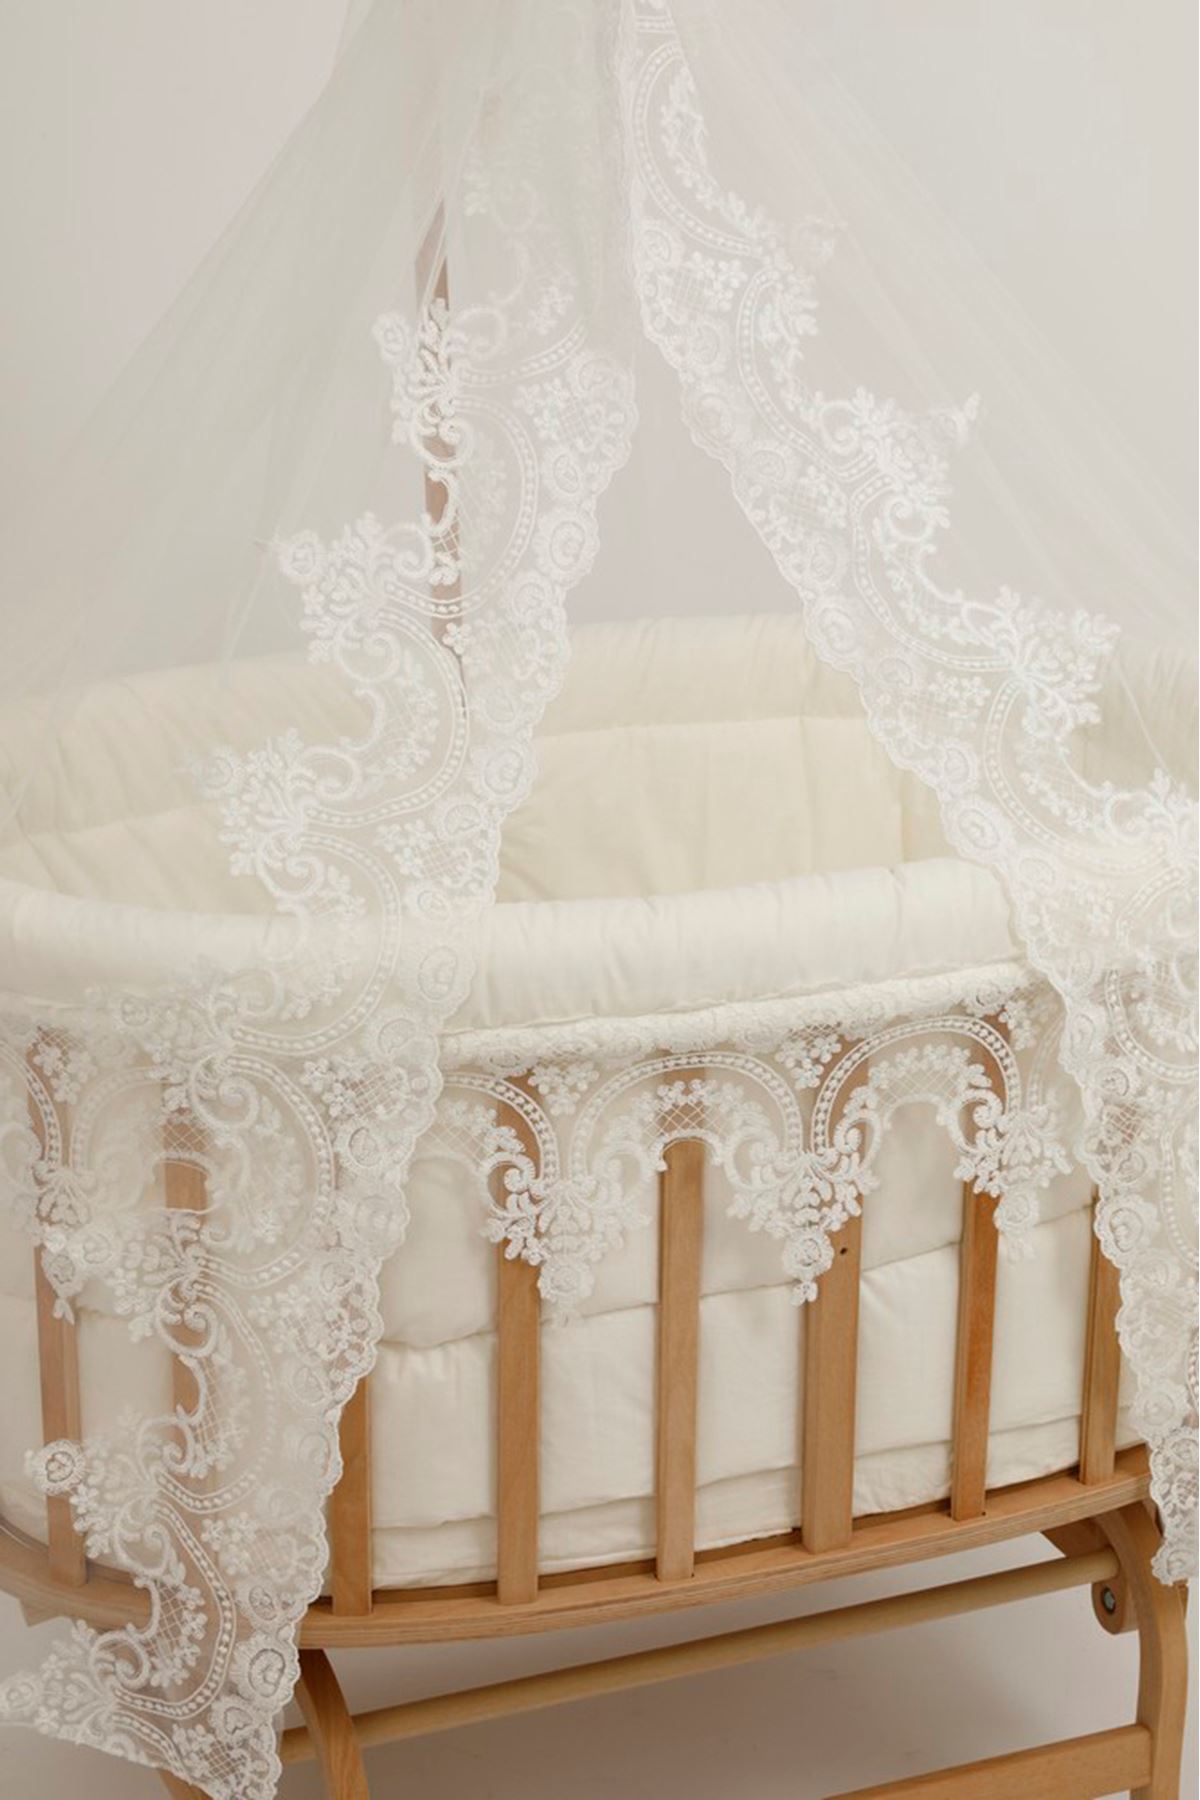 Baby Cot with Guipure Sleeping Set